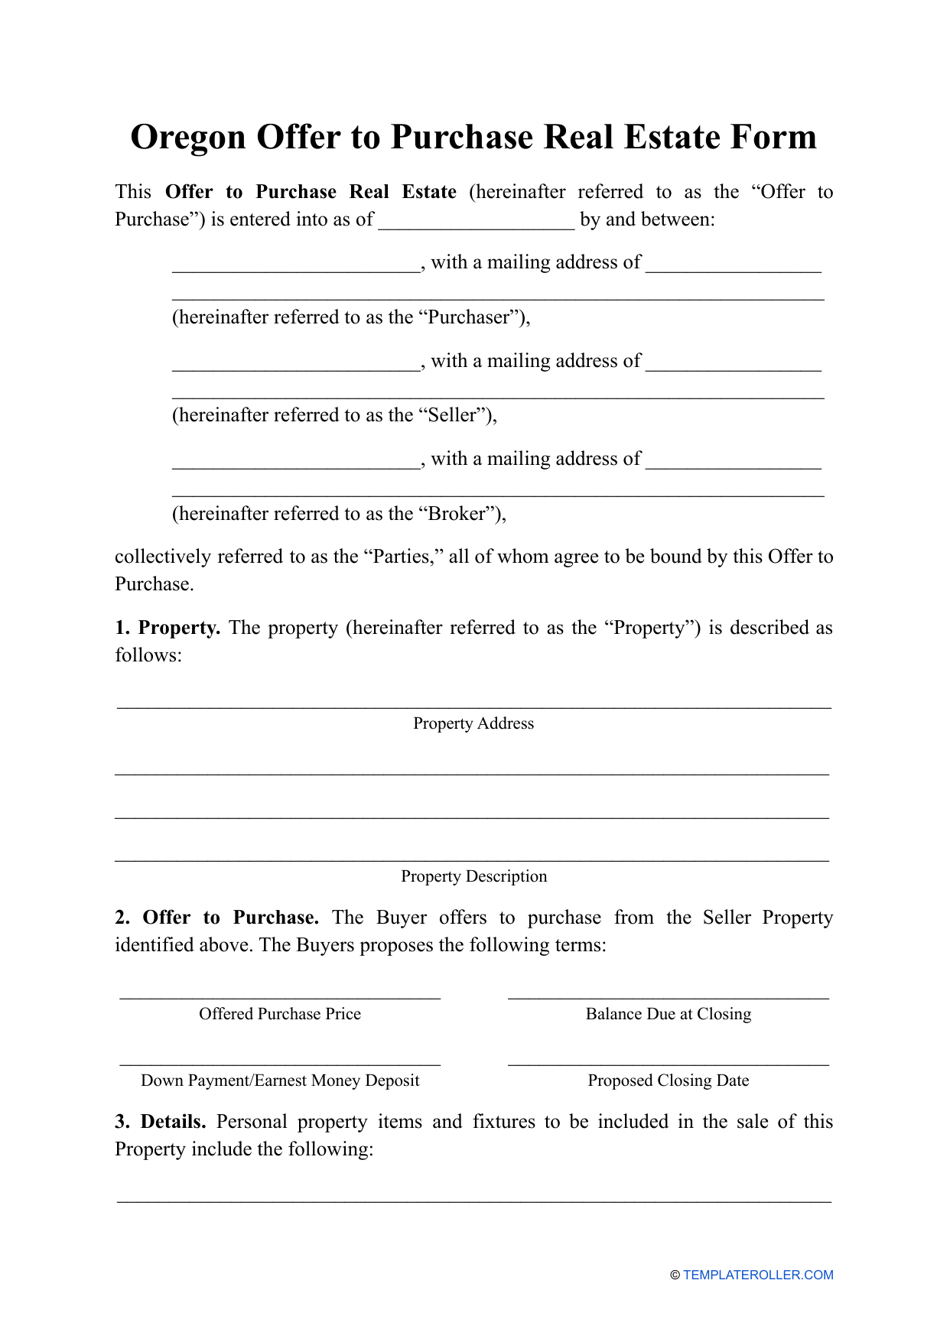 Offer to Purchase Real Estate Form - Oregon, Page 1